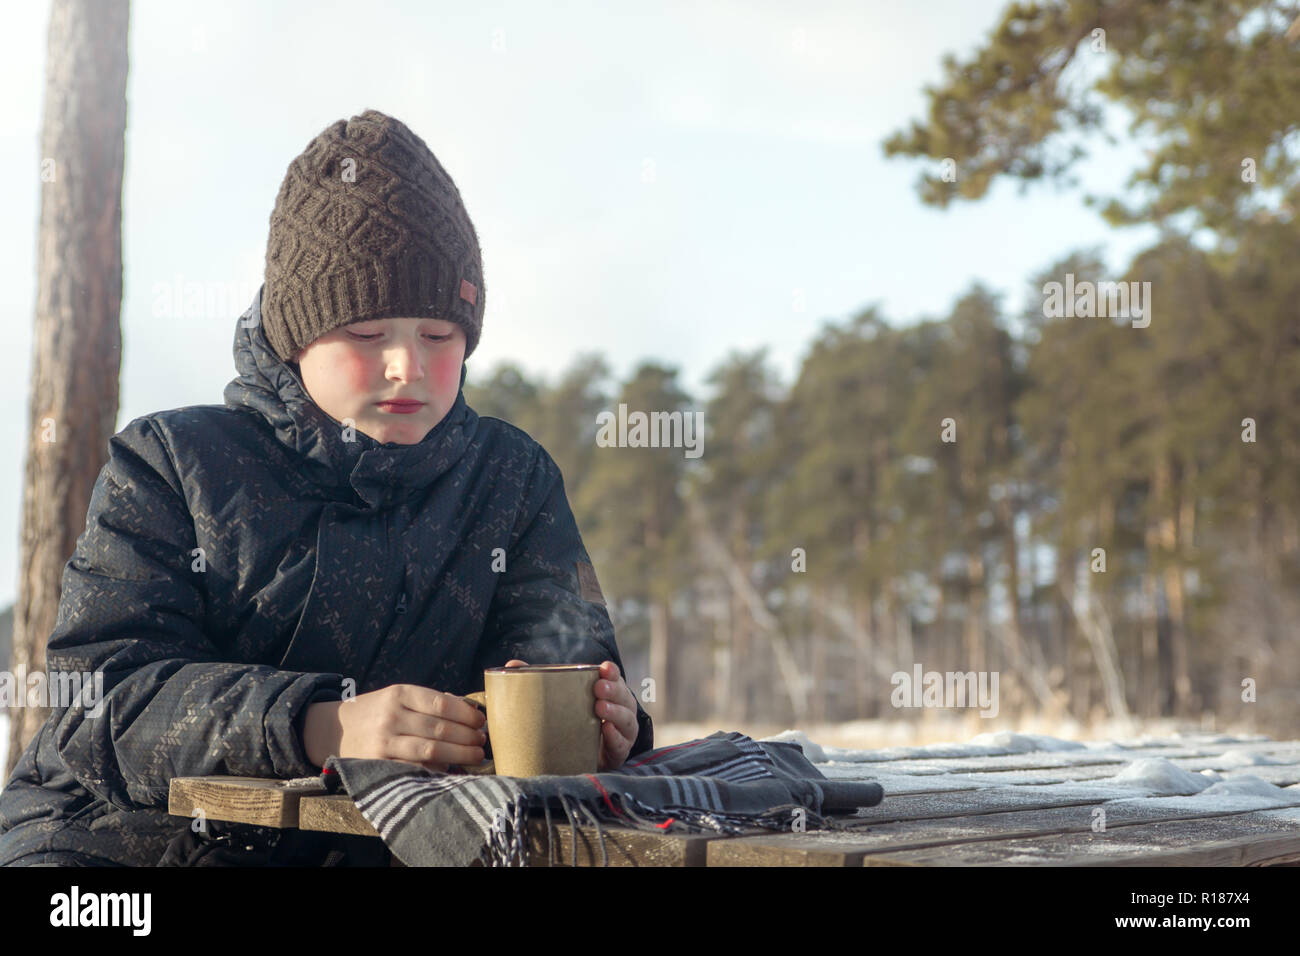 Boy In A Cold Winter Day Outdoors In Warm Clothes Stock Photo, Picture and  Royalty Free Image. Image 25442133.